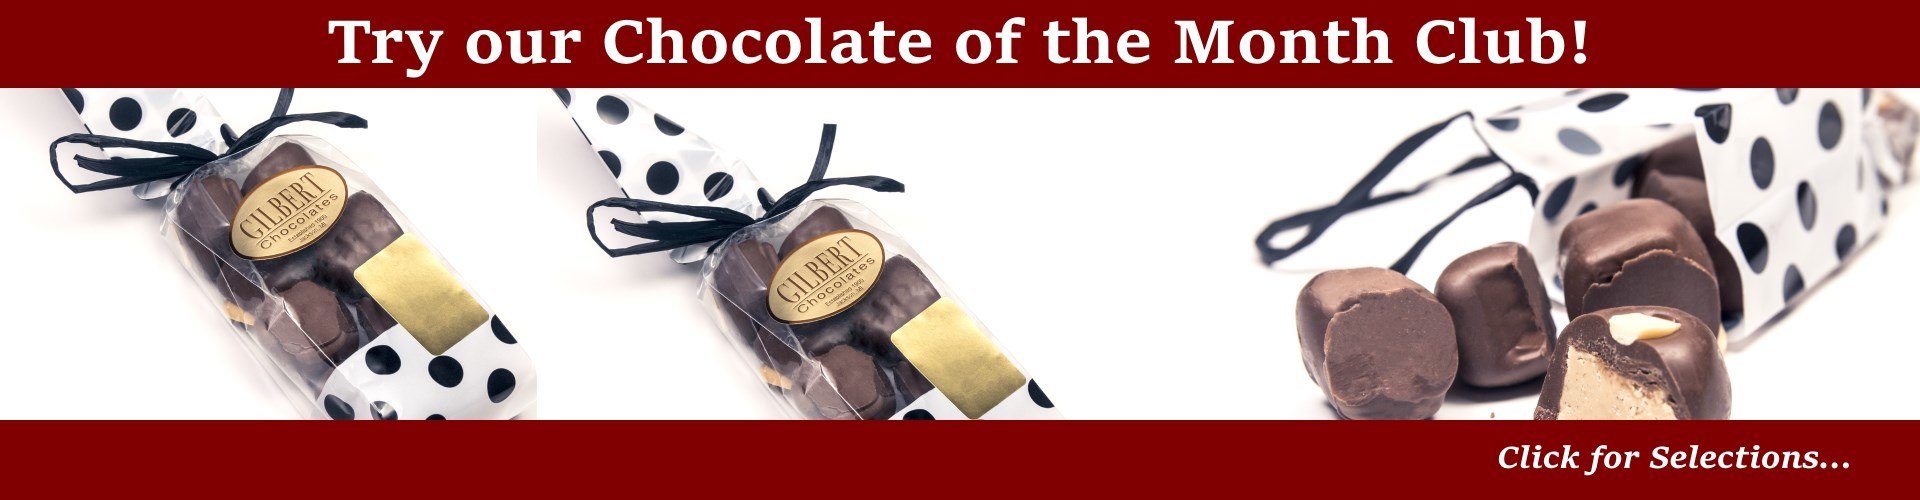 Chocolate of Month bagged chocolates